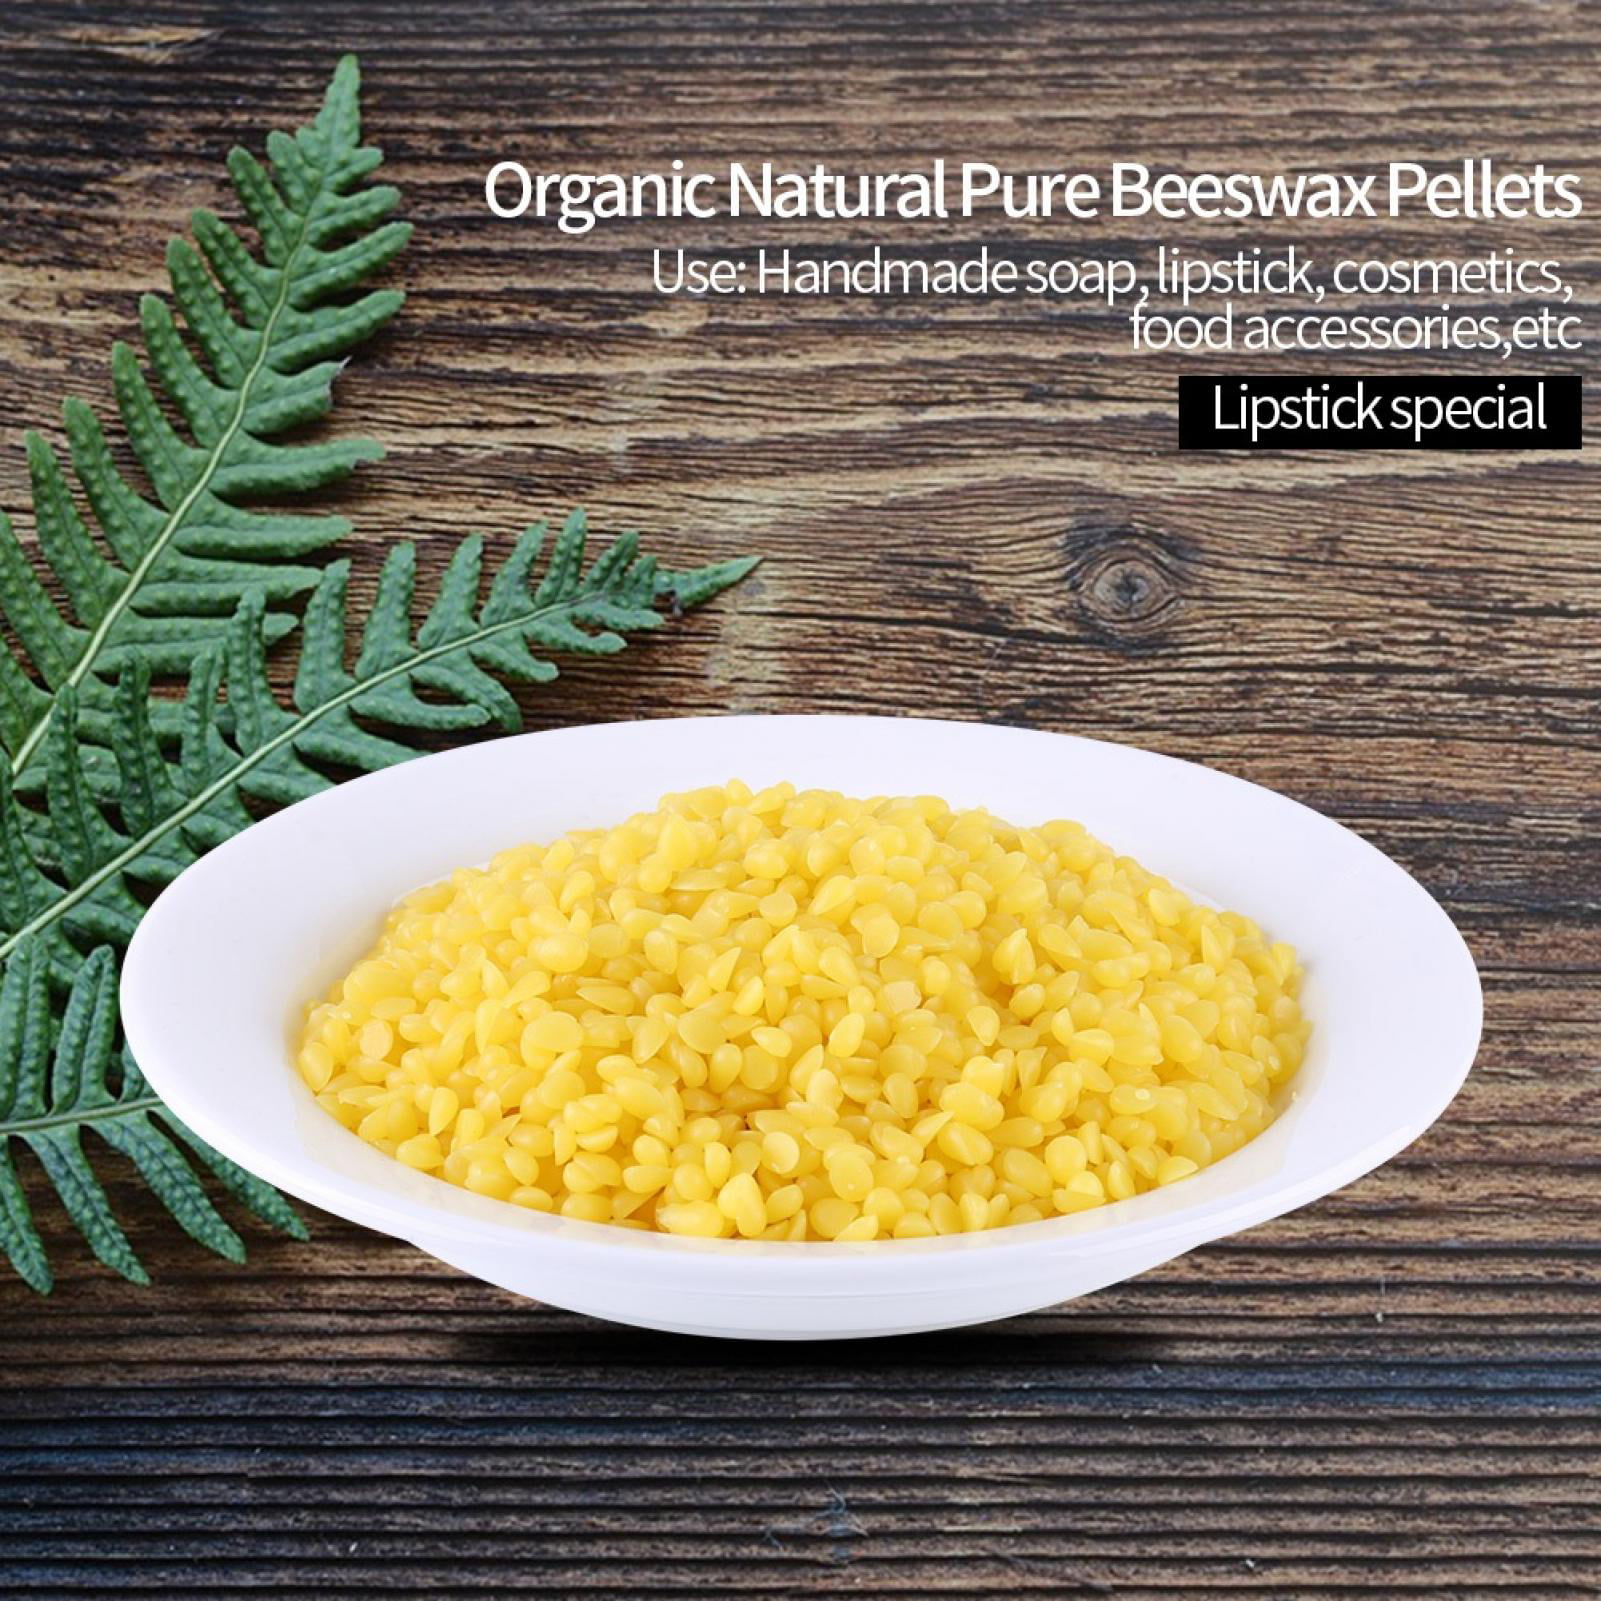 Organic Yellow Beeswax Pellets (1lb) - Our Essential Living - Raw Skin  Foods You Can Trust